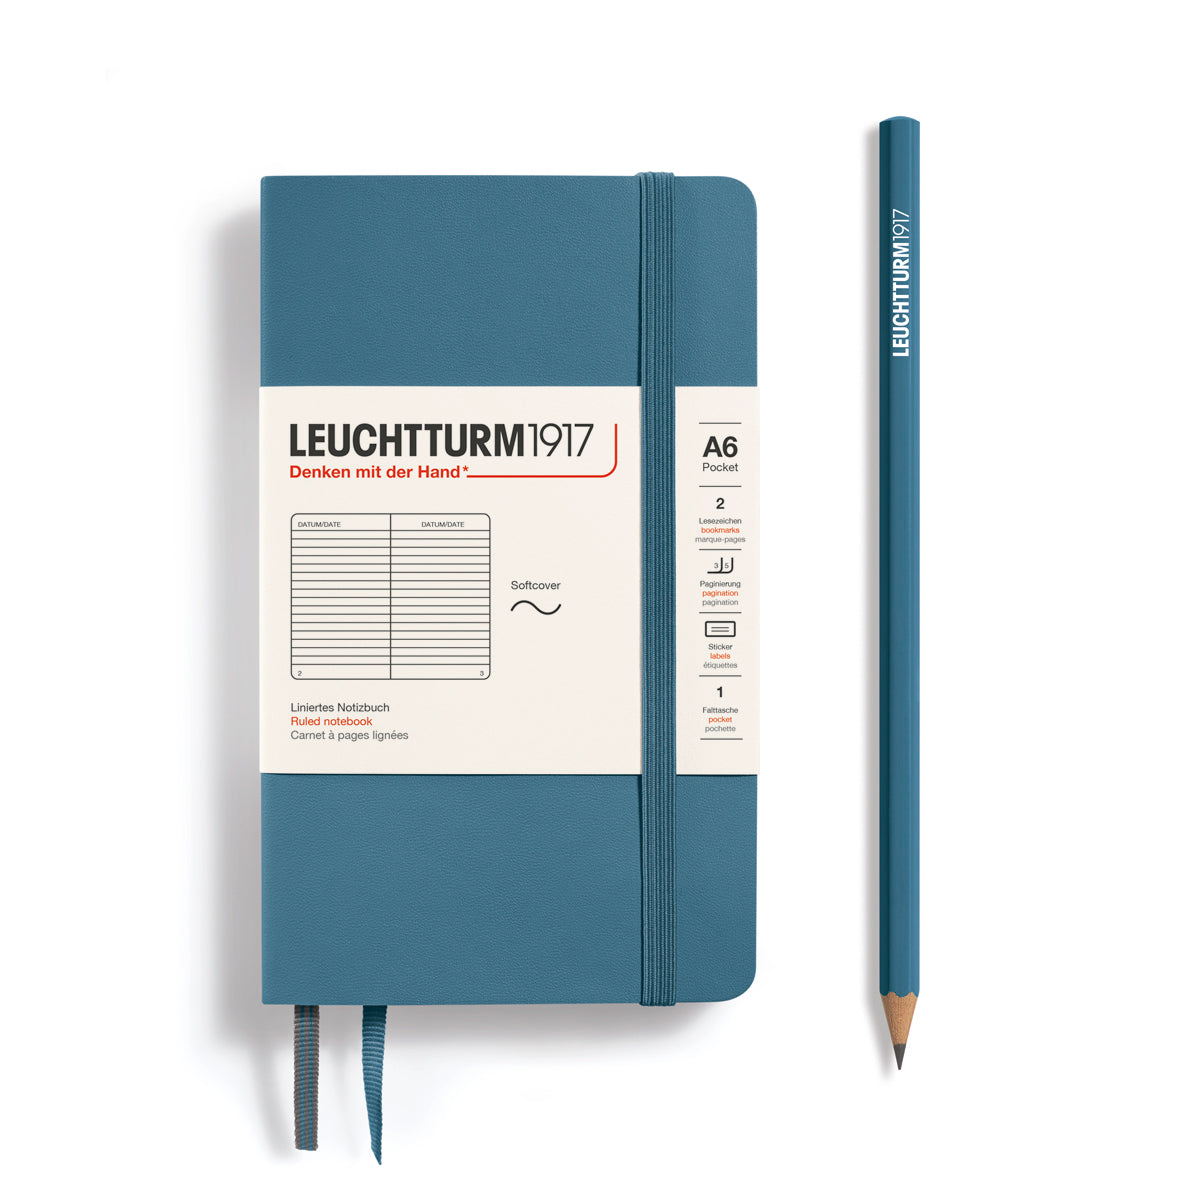 LEUCHTTURM1917 Notebook A6 Pocket Softcover in stone blue and ruled inside at Penny Black